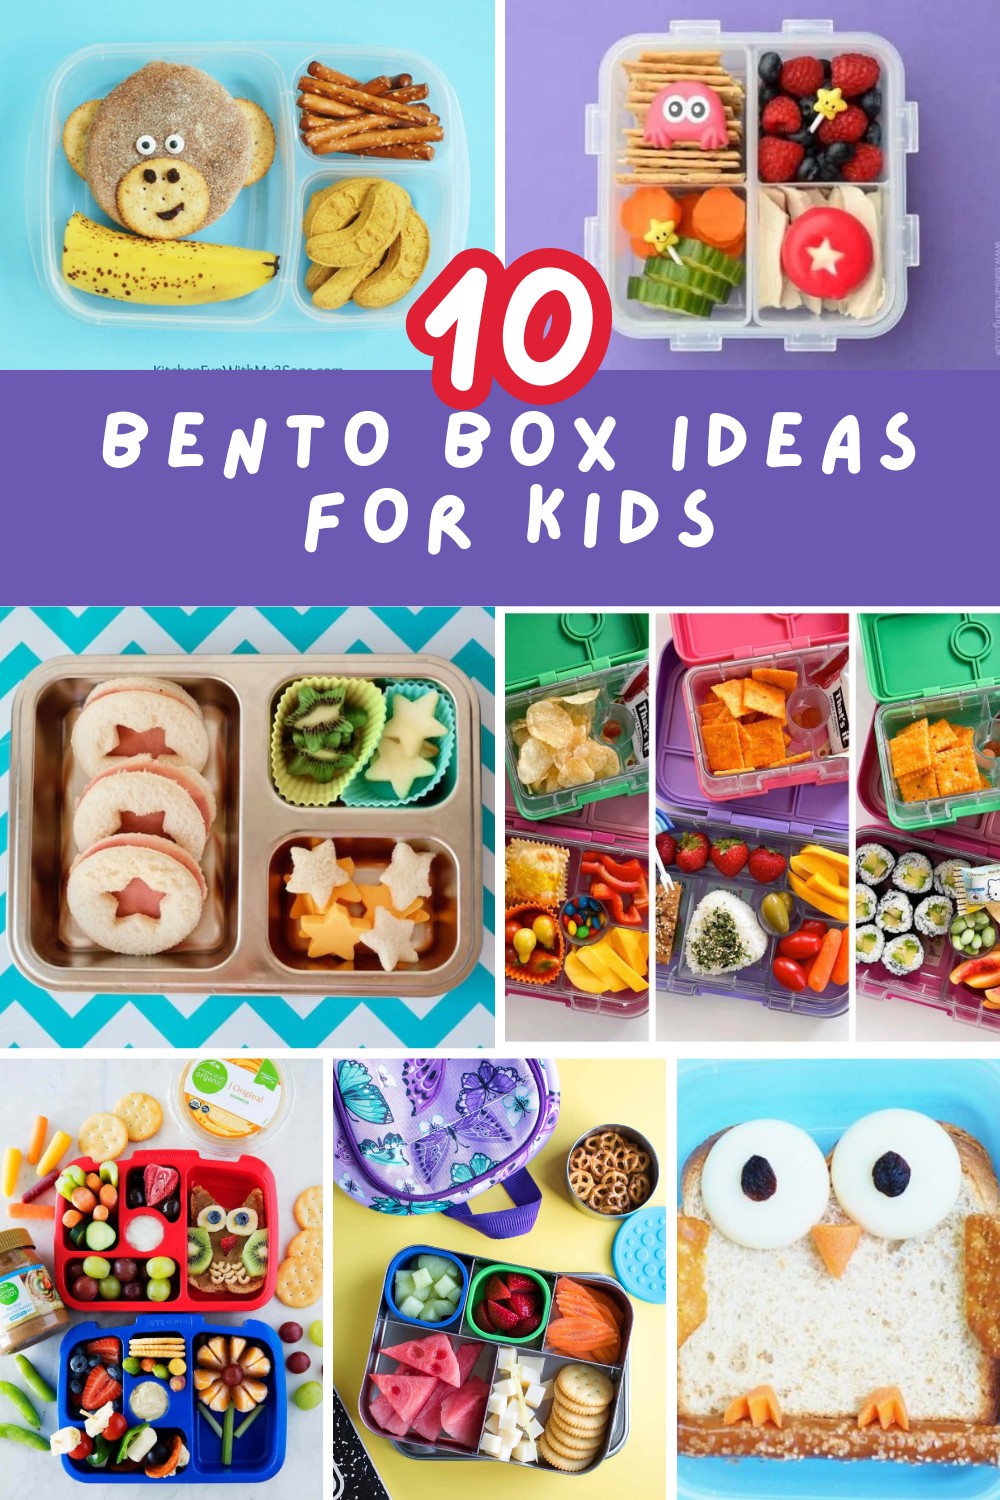 Say goodbye to lunch struggles with these kid-friendly bento box ideas! Perfect for children with allergies, picky eaters, or special diets, these lunches are both delicious and nutritious. Make lunchtime exciting again! 🍱👧 #KidsMeals #BentoBoxIdeas #LunchPrep